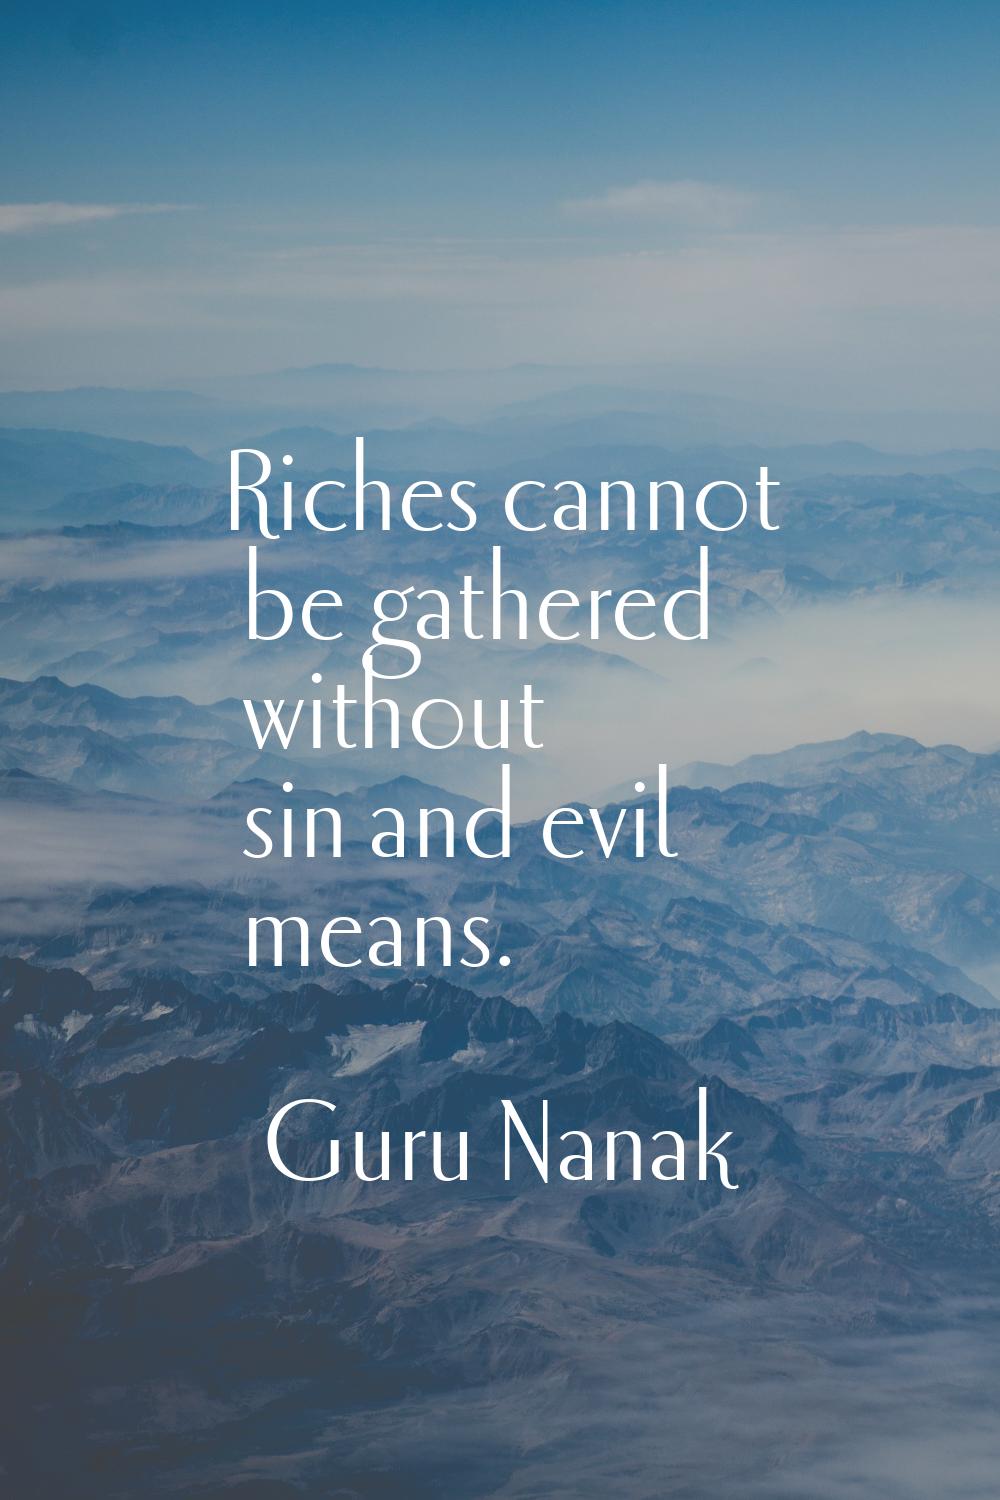 Riches cannot be gathered without sin and evil means.